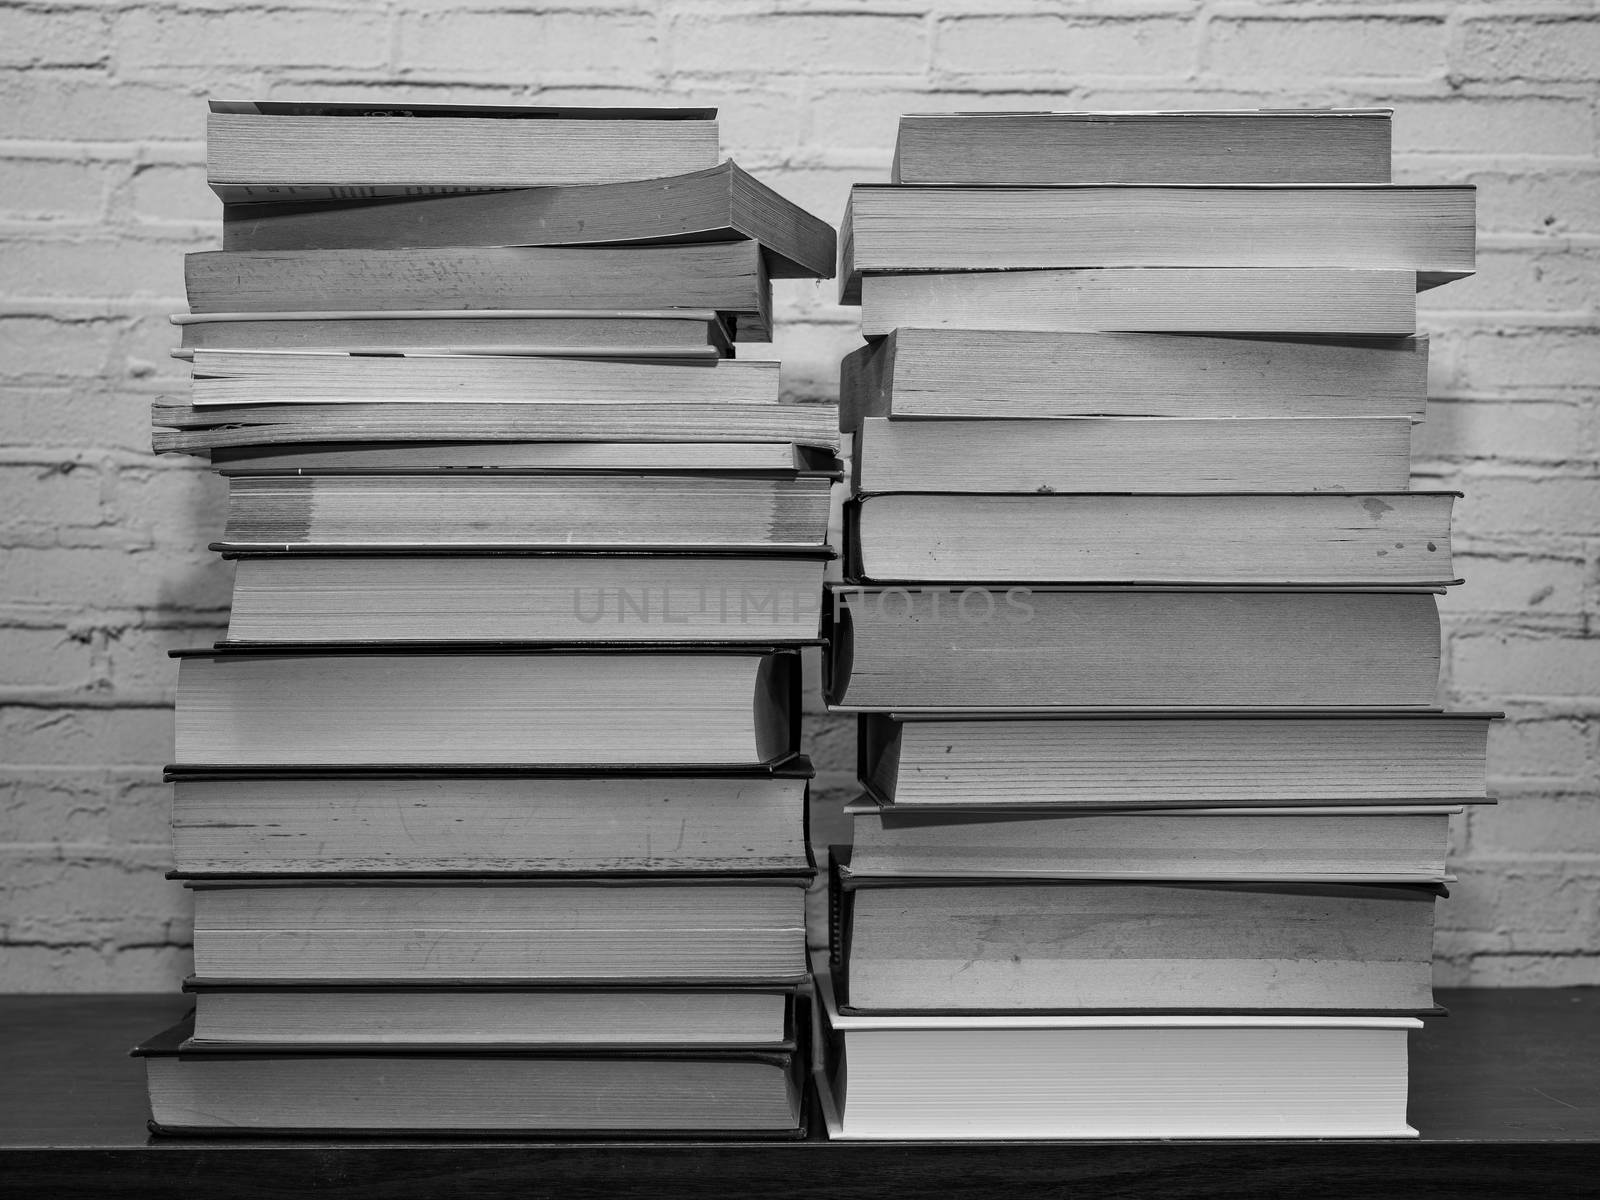 Black and white image of some books stacked on a shelf, light brick background